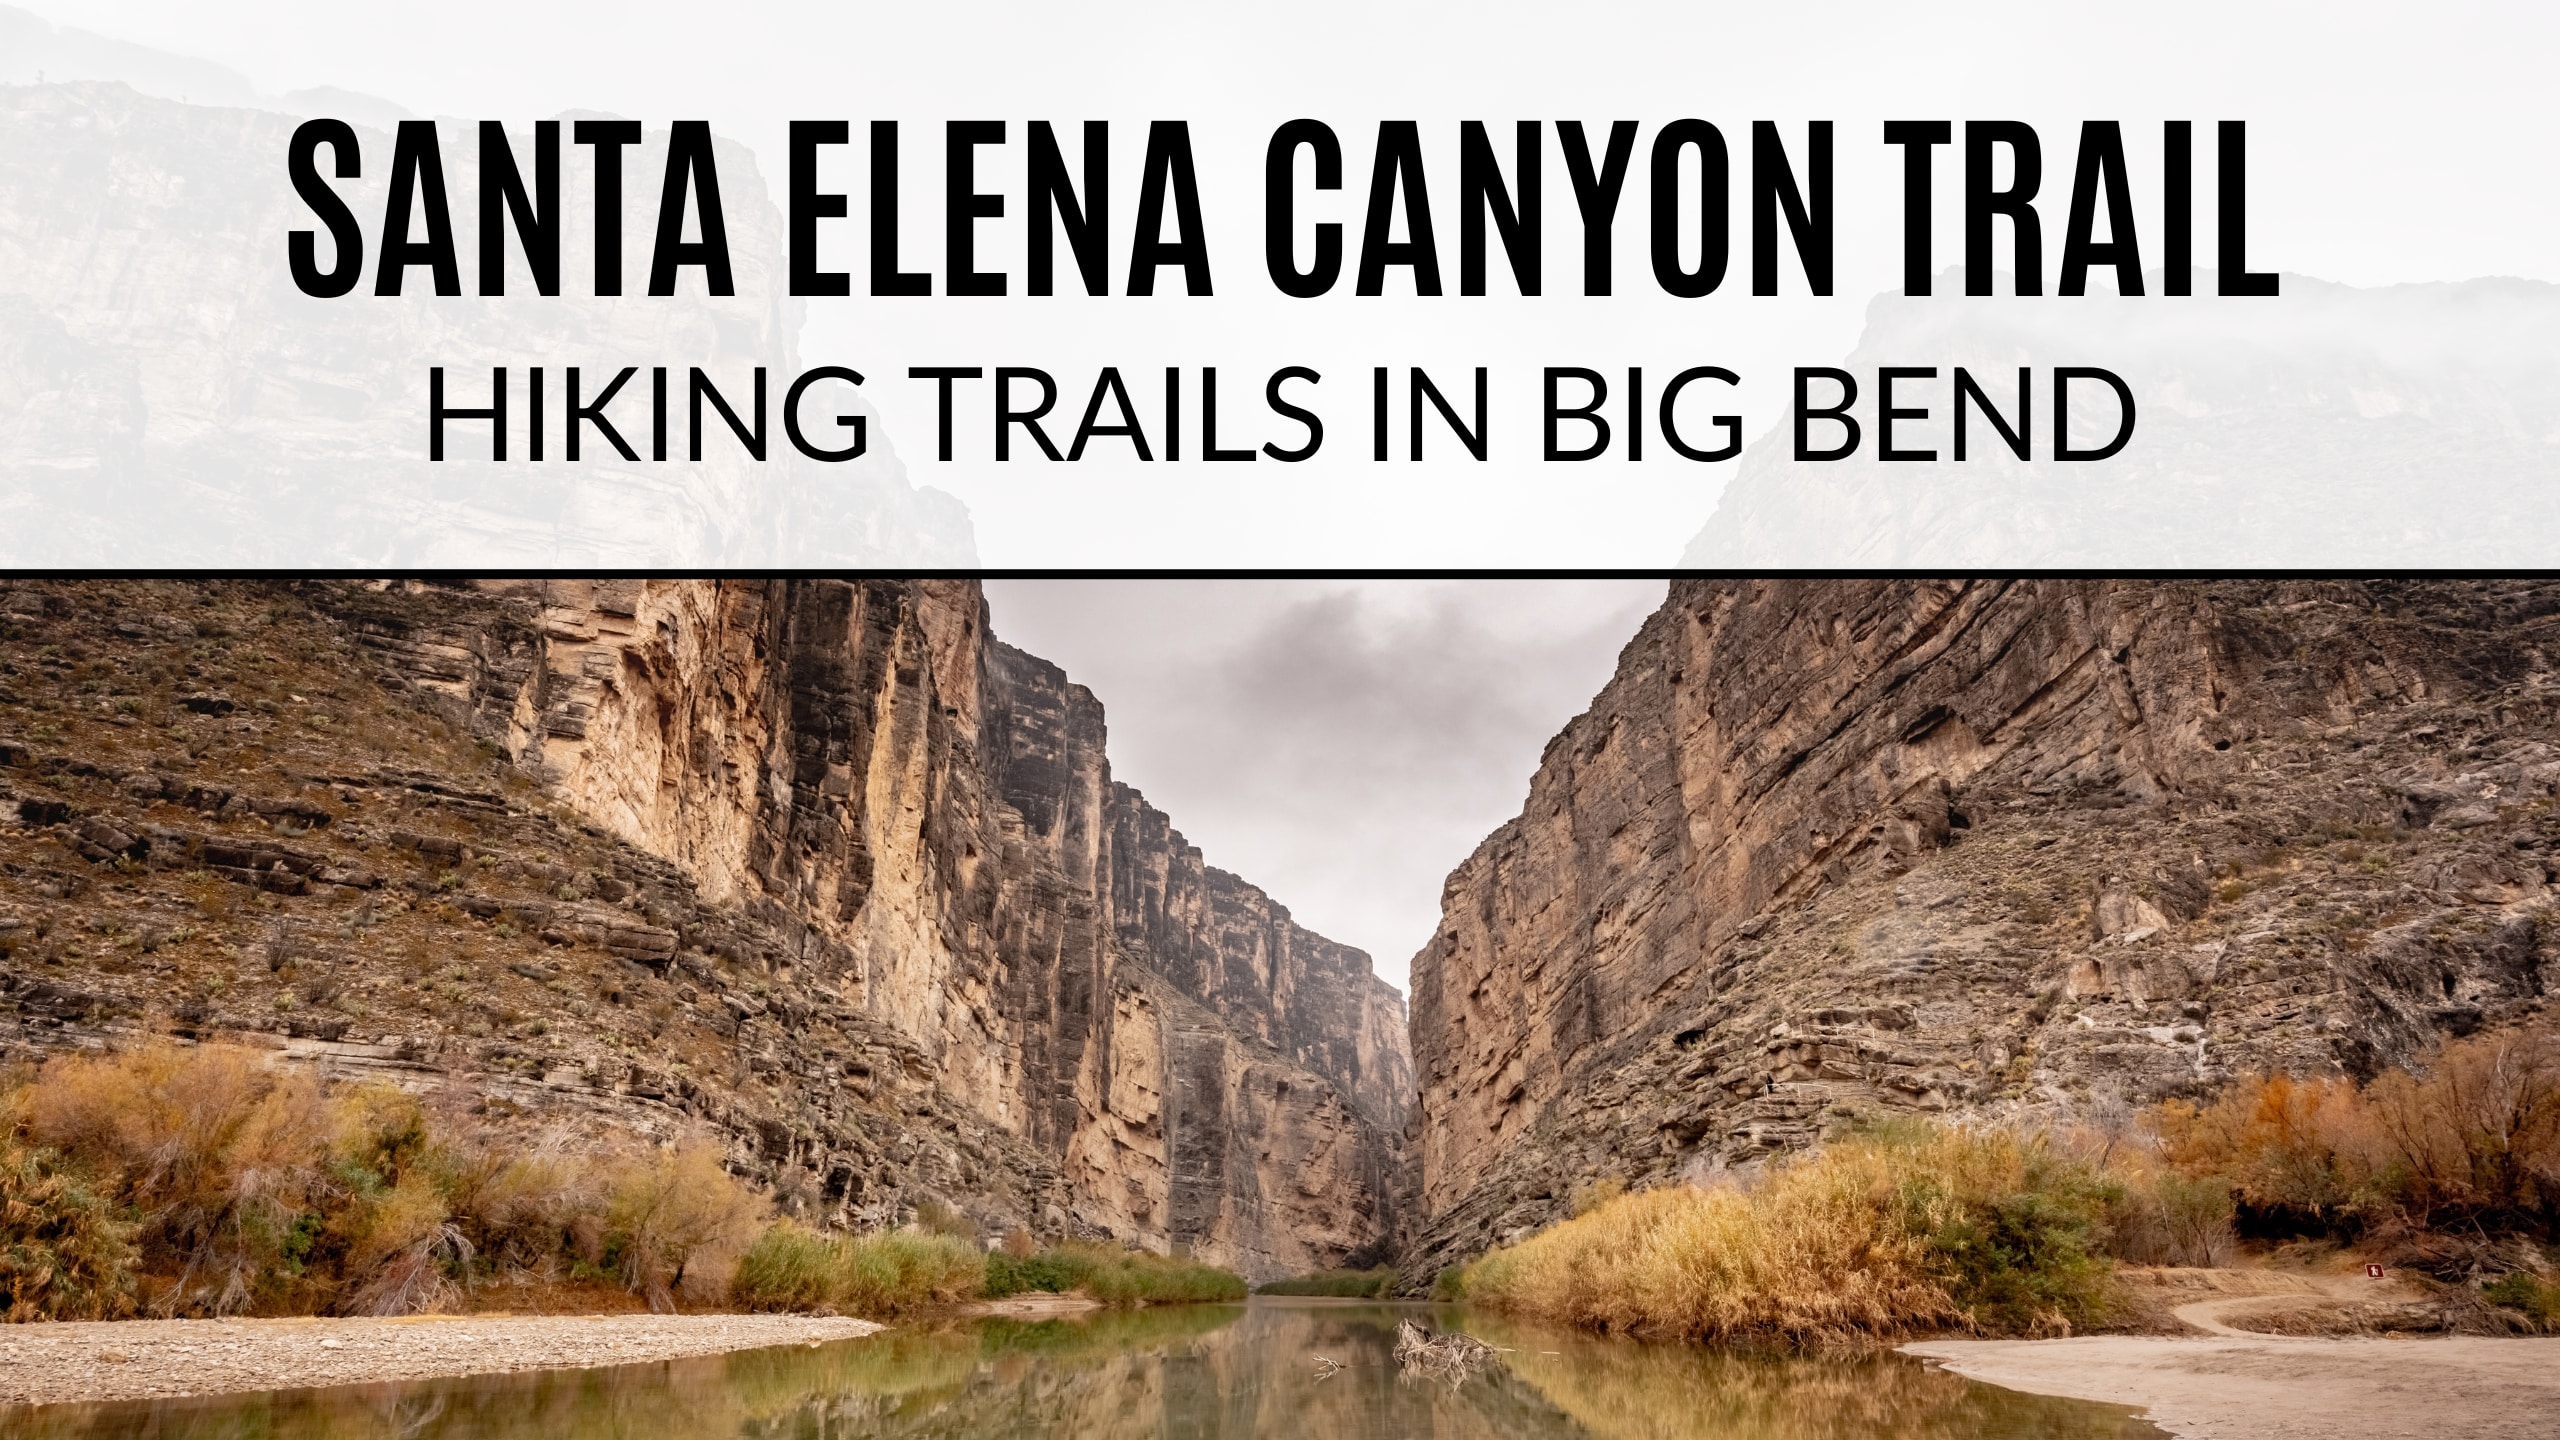 Santa Elena Canyon on an overcast day. Text on image says "Santa Elena Canyon Trail. Hiking Trails in Big Bend"